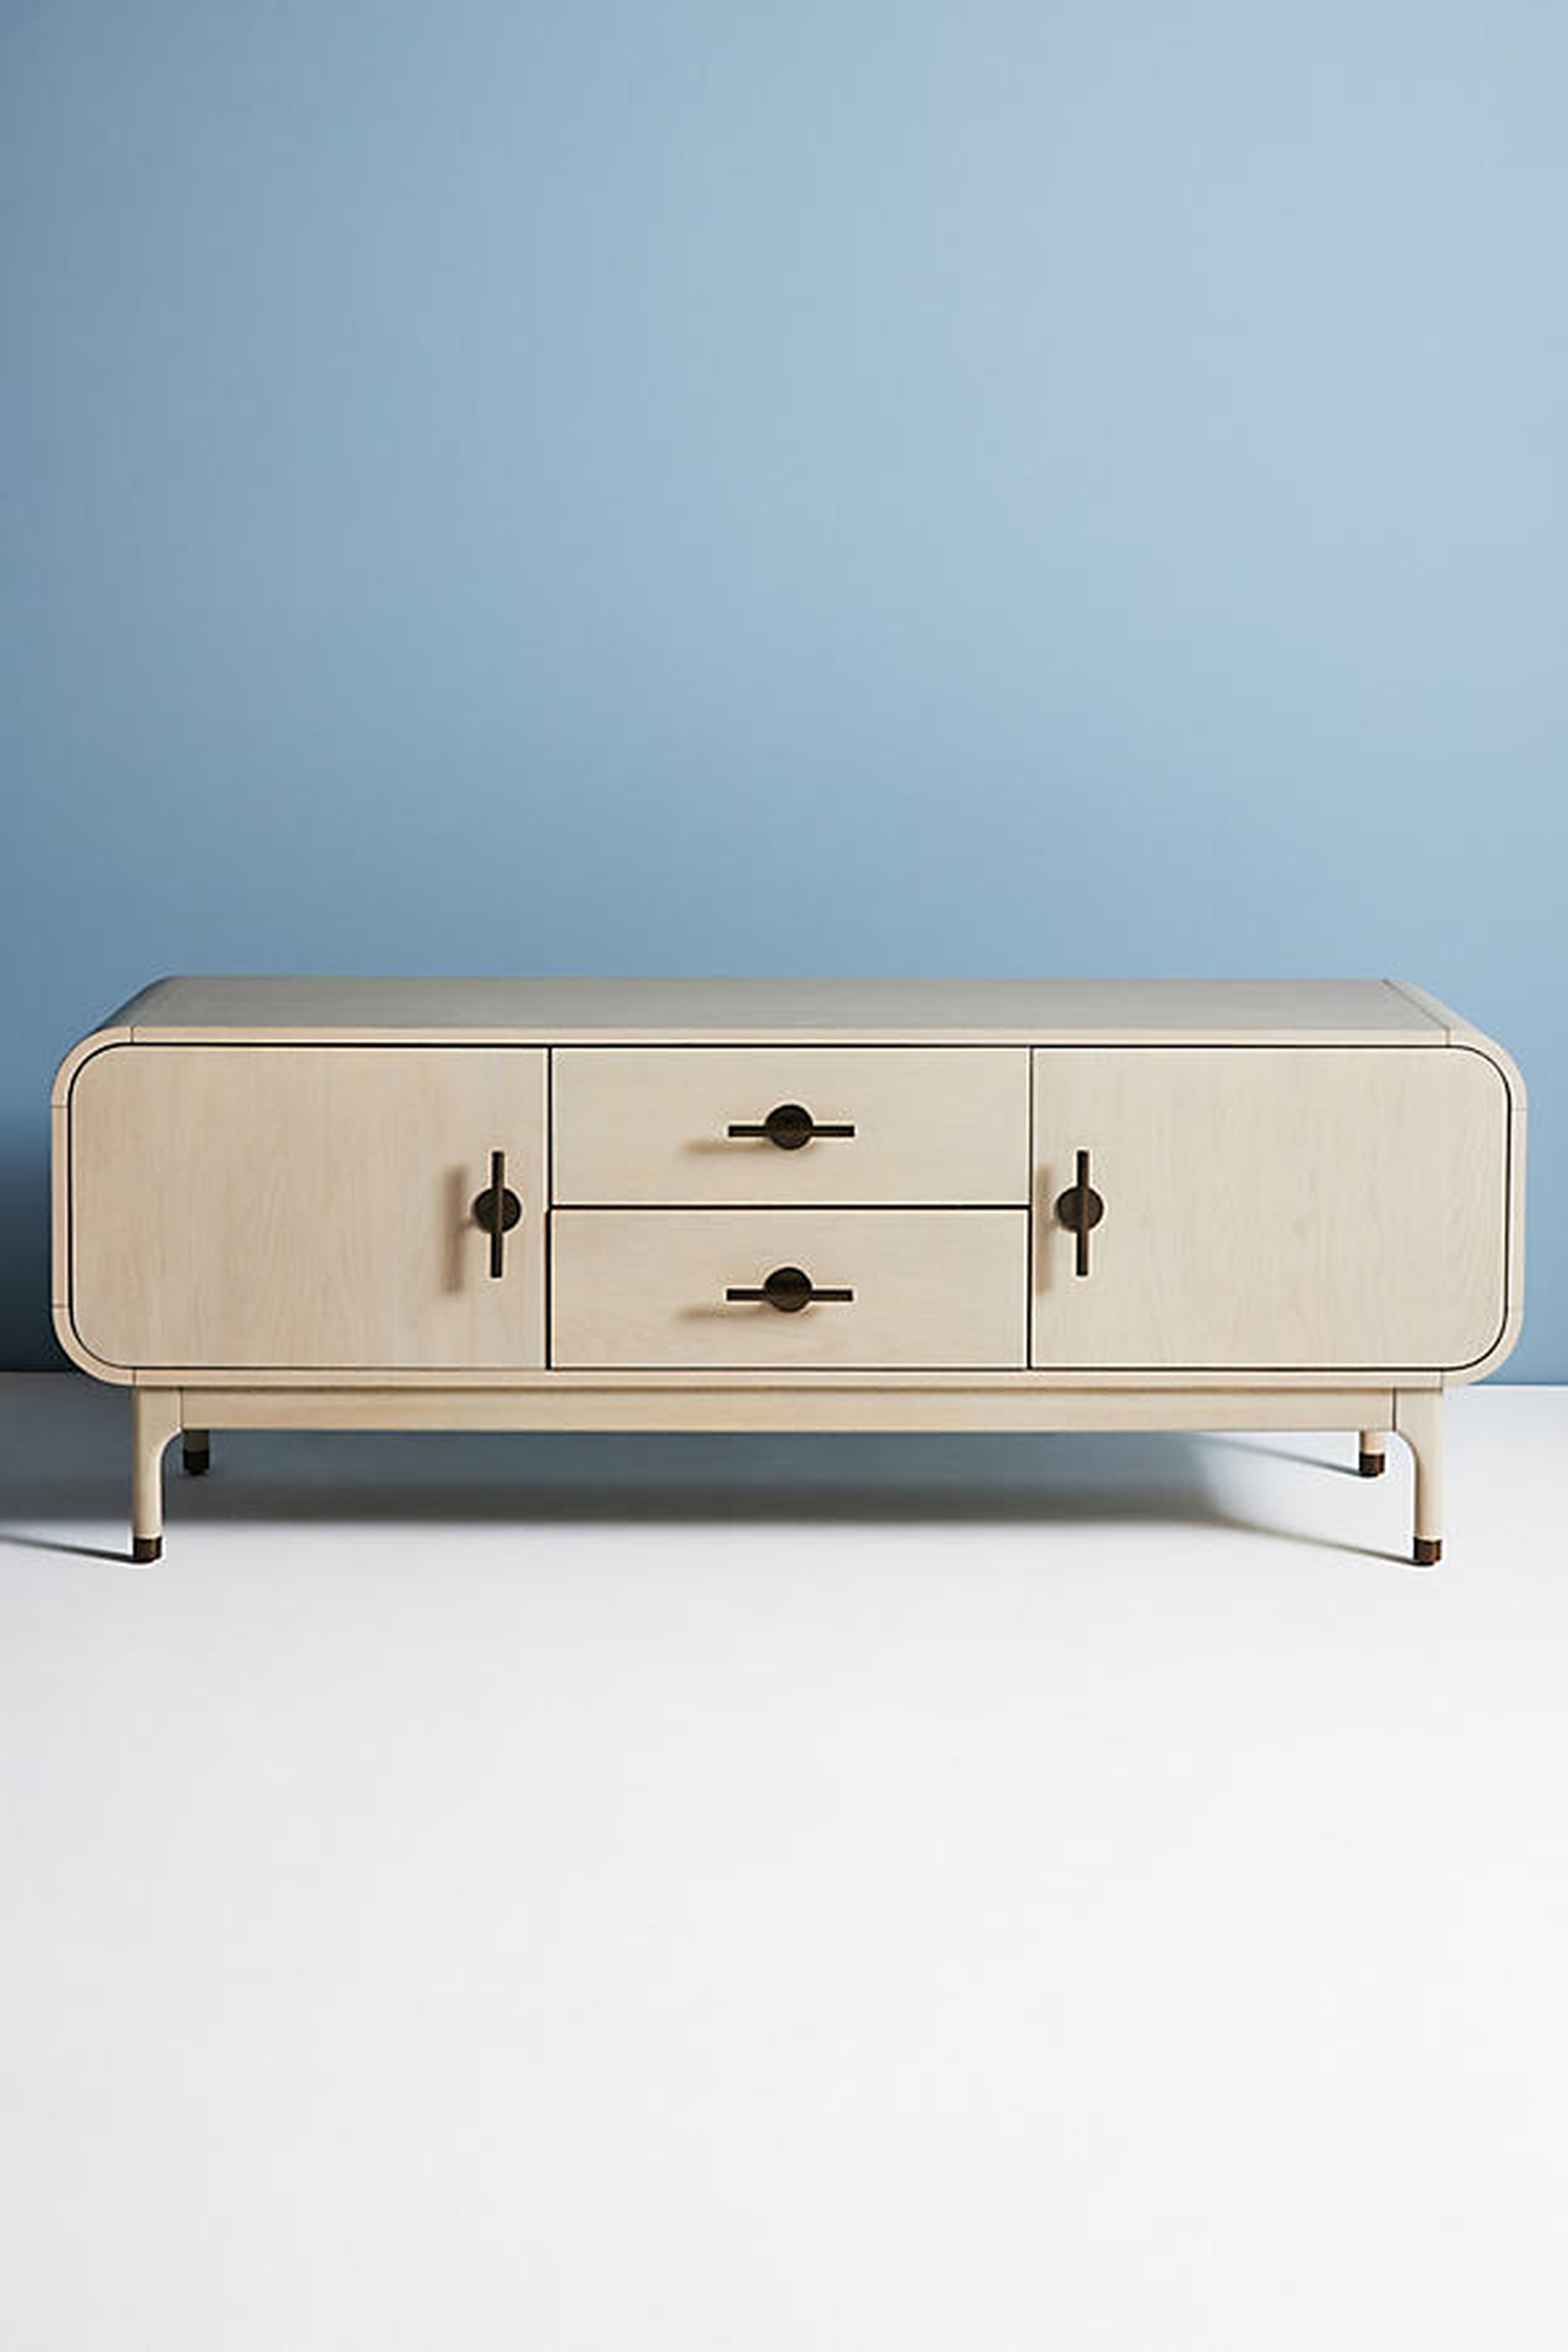 Nora Media Console By Anthropologie in Grey - Anthropologie